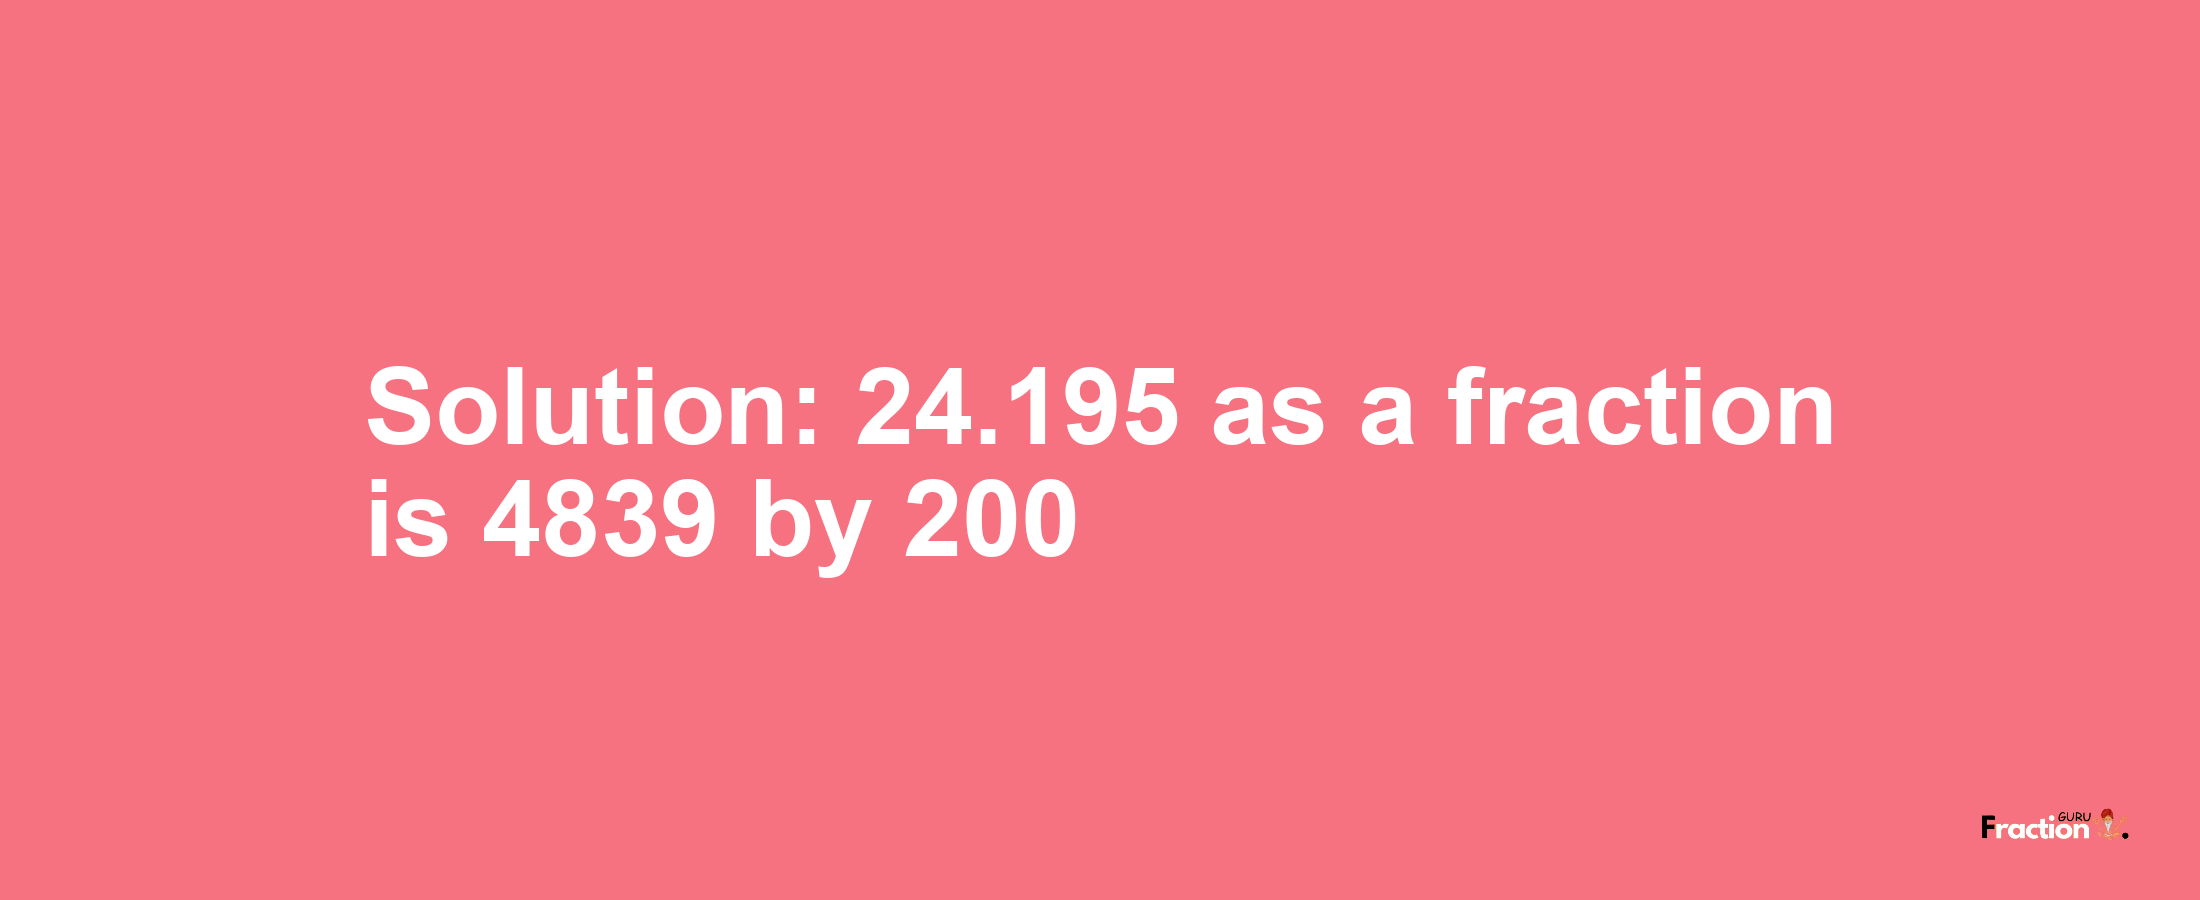 Solution:24.195 as a fraction is 4839/200